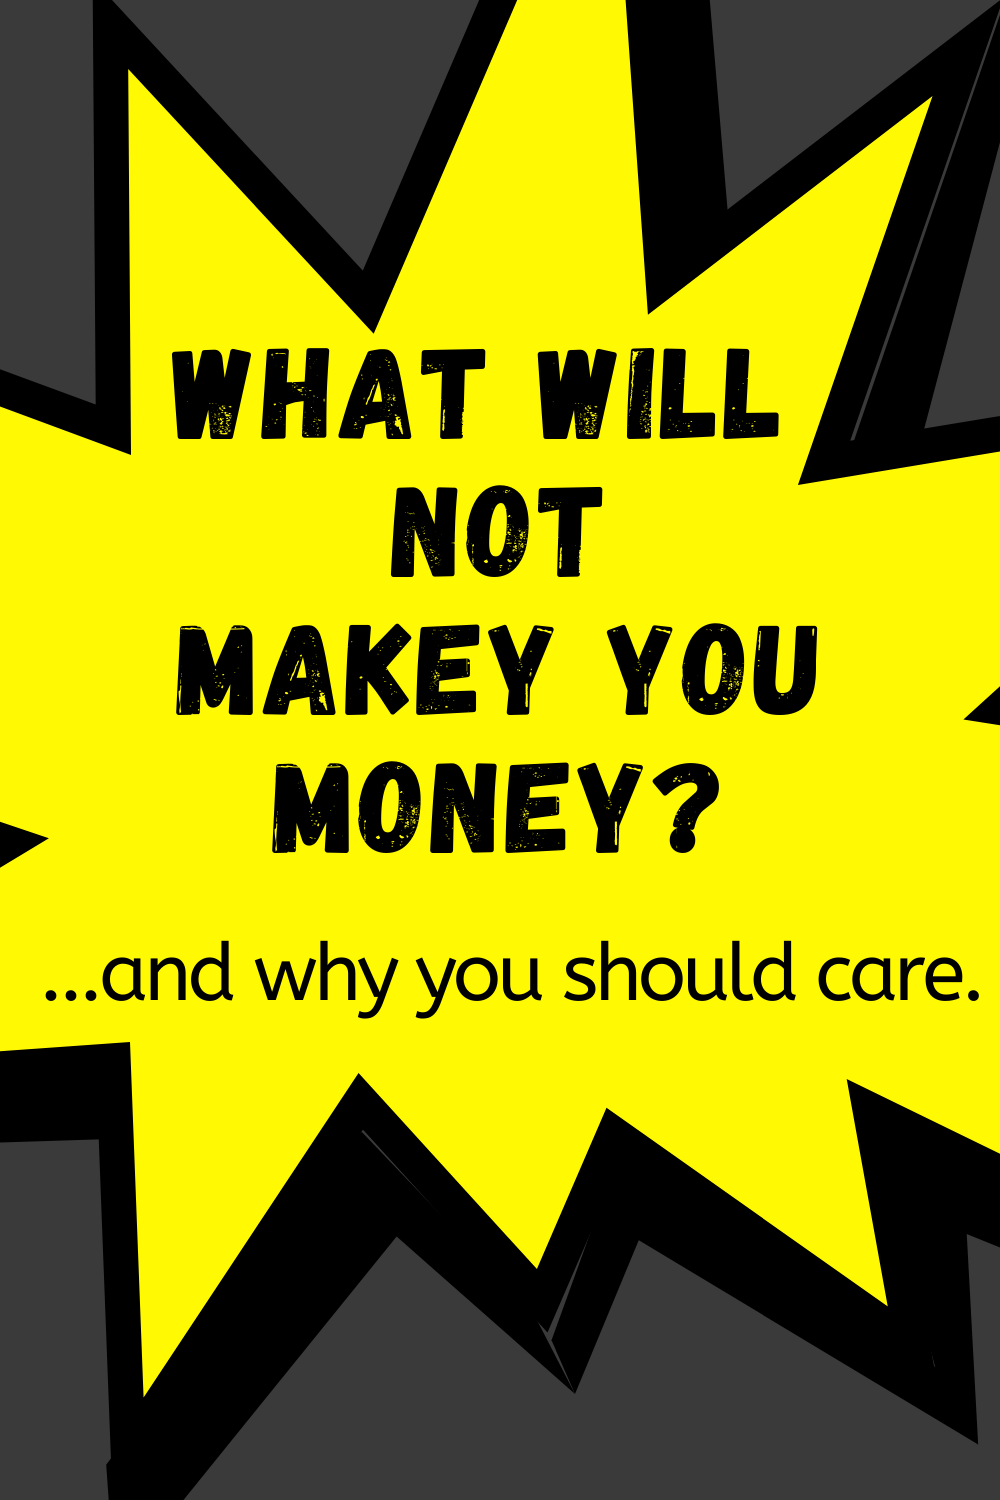 What will not make you money